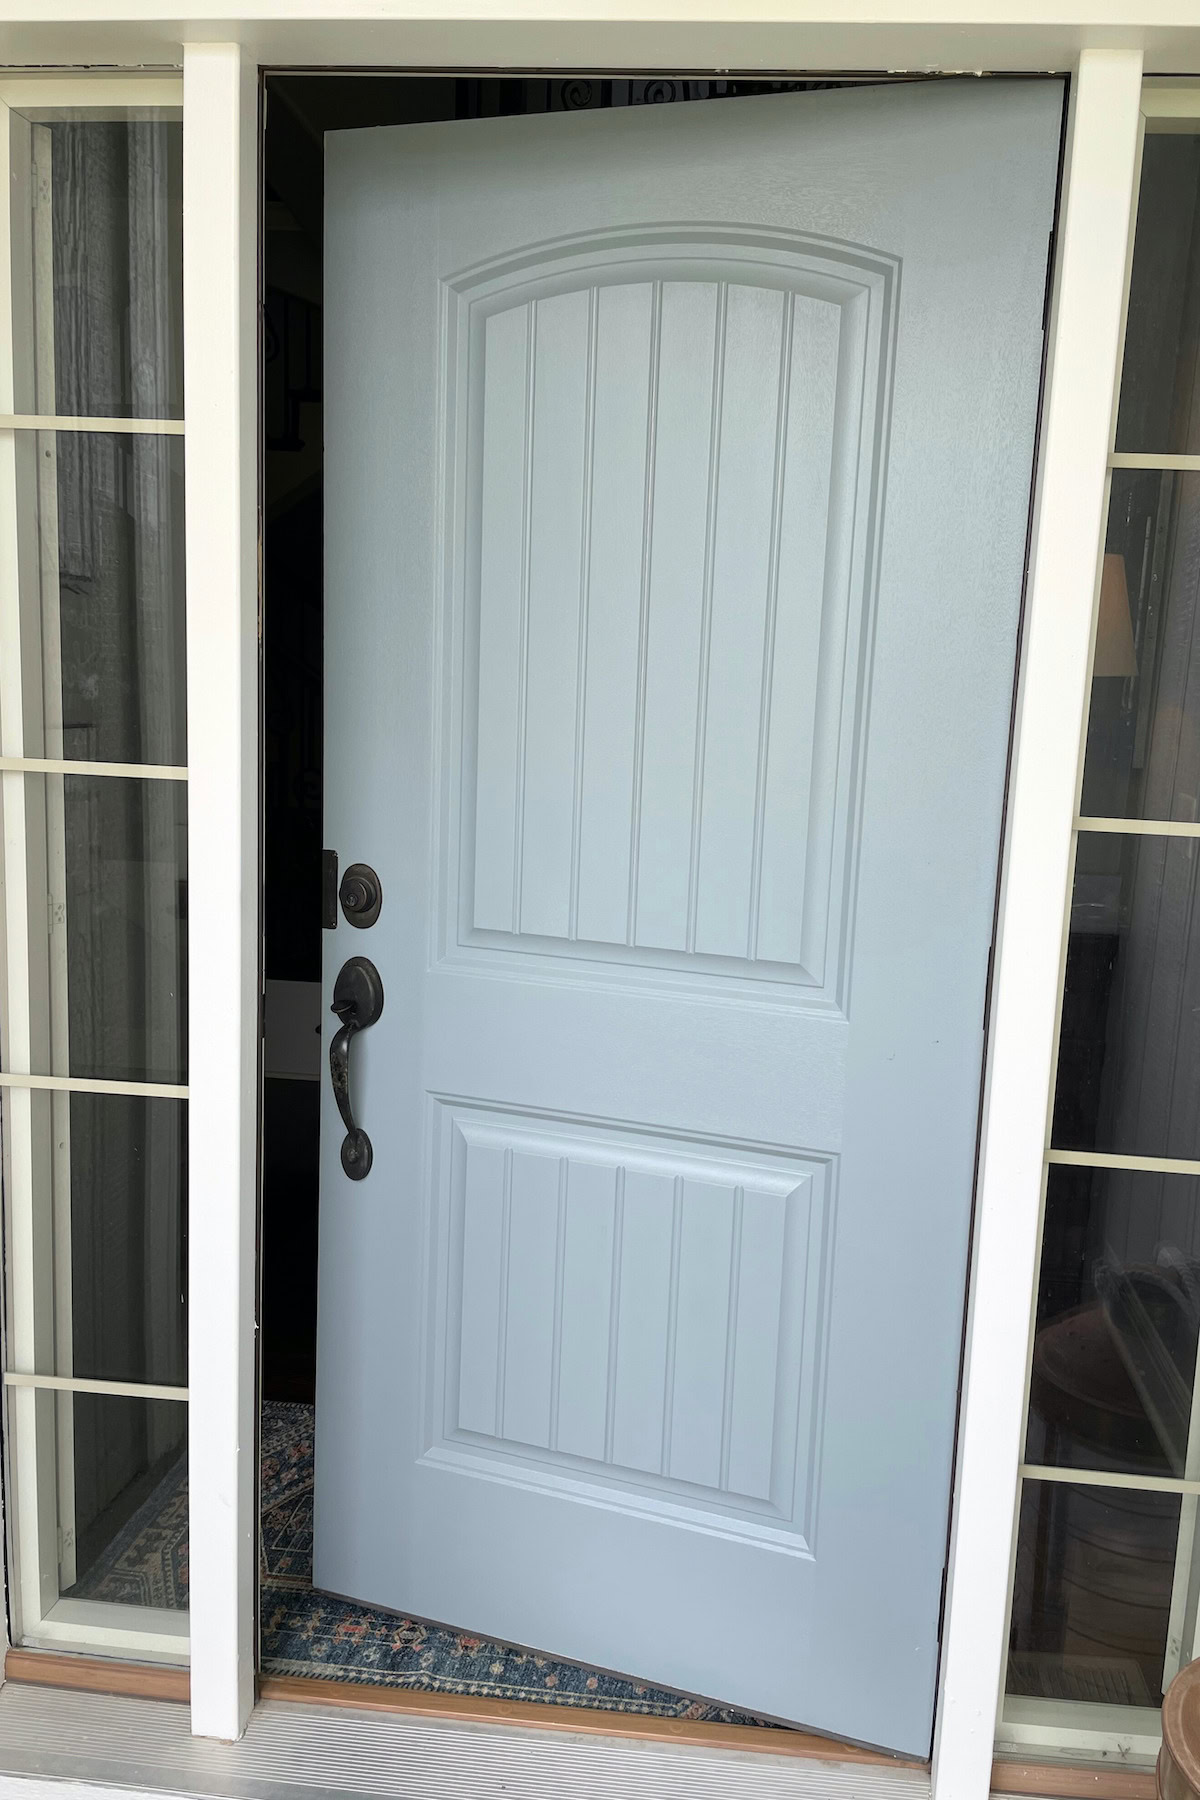 A partially open light blue front door painted in Benjamin Moore Brewster Gray with decorative paneling viewed head-on. It has a dark handle and is framed by glass windows on both sides.